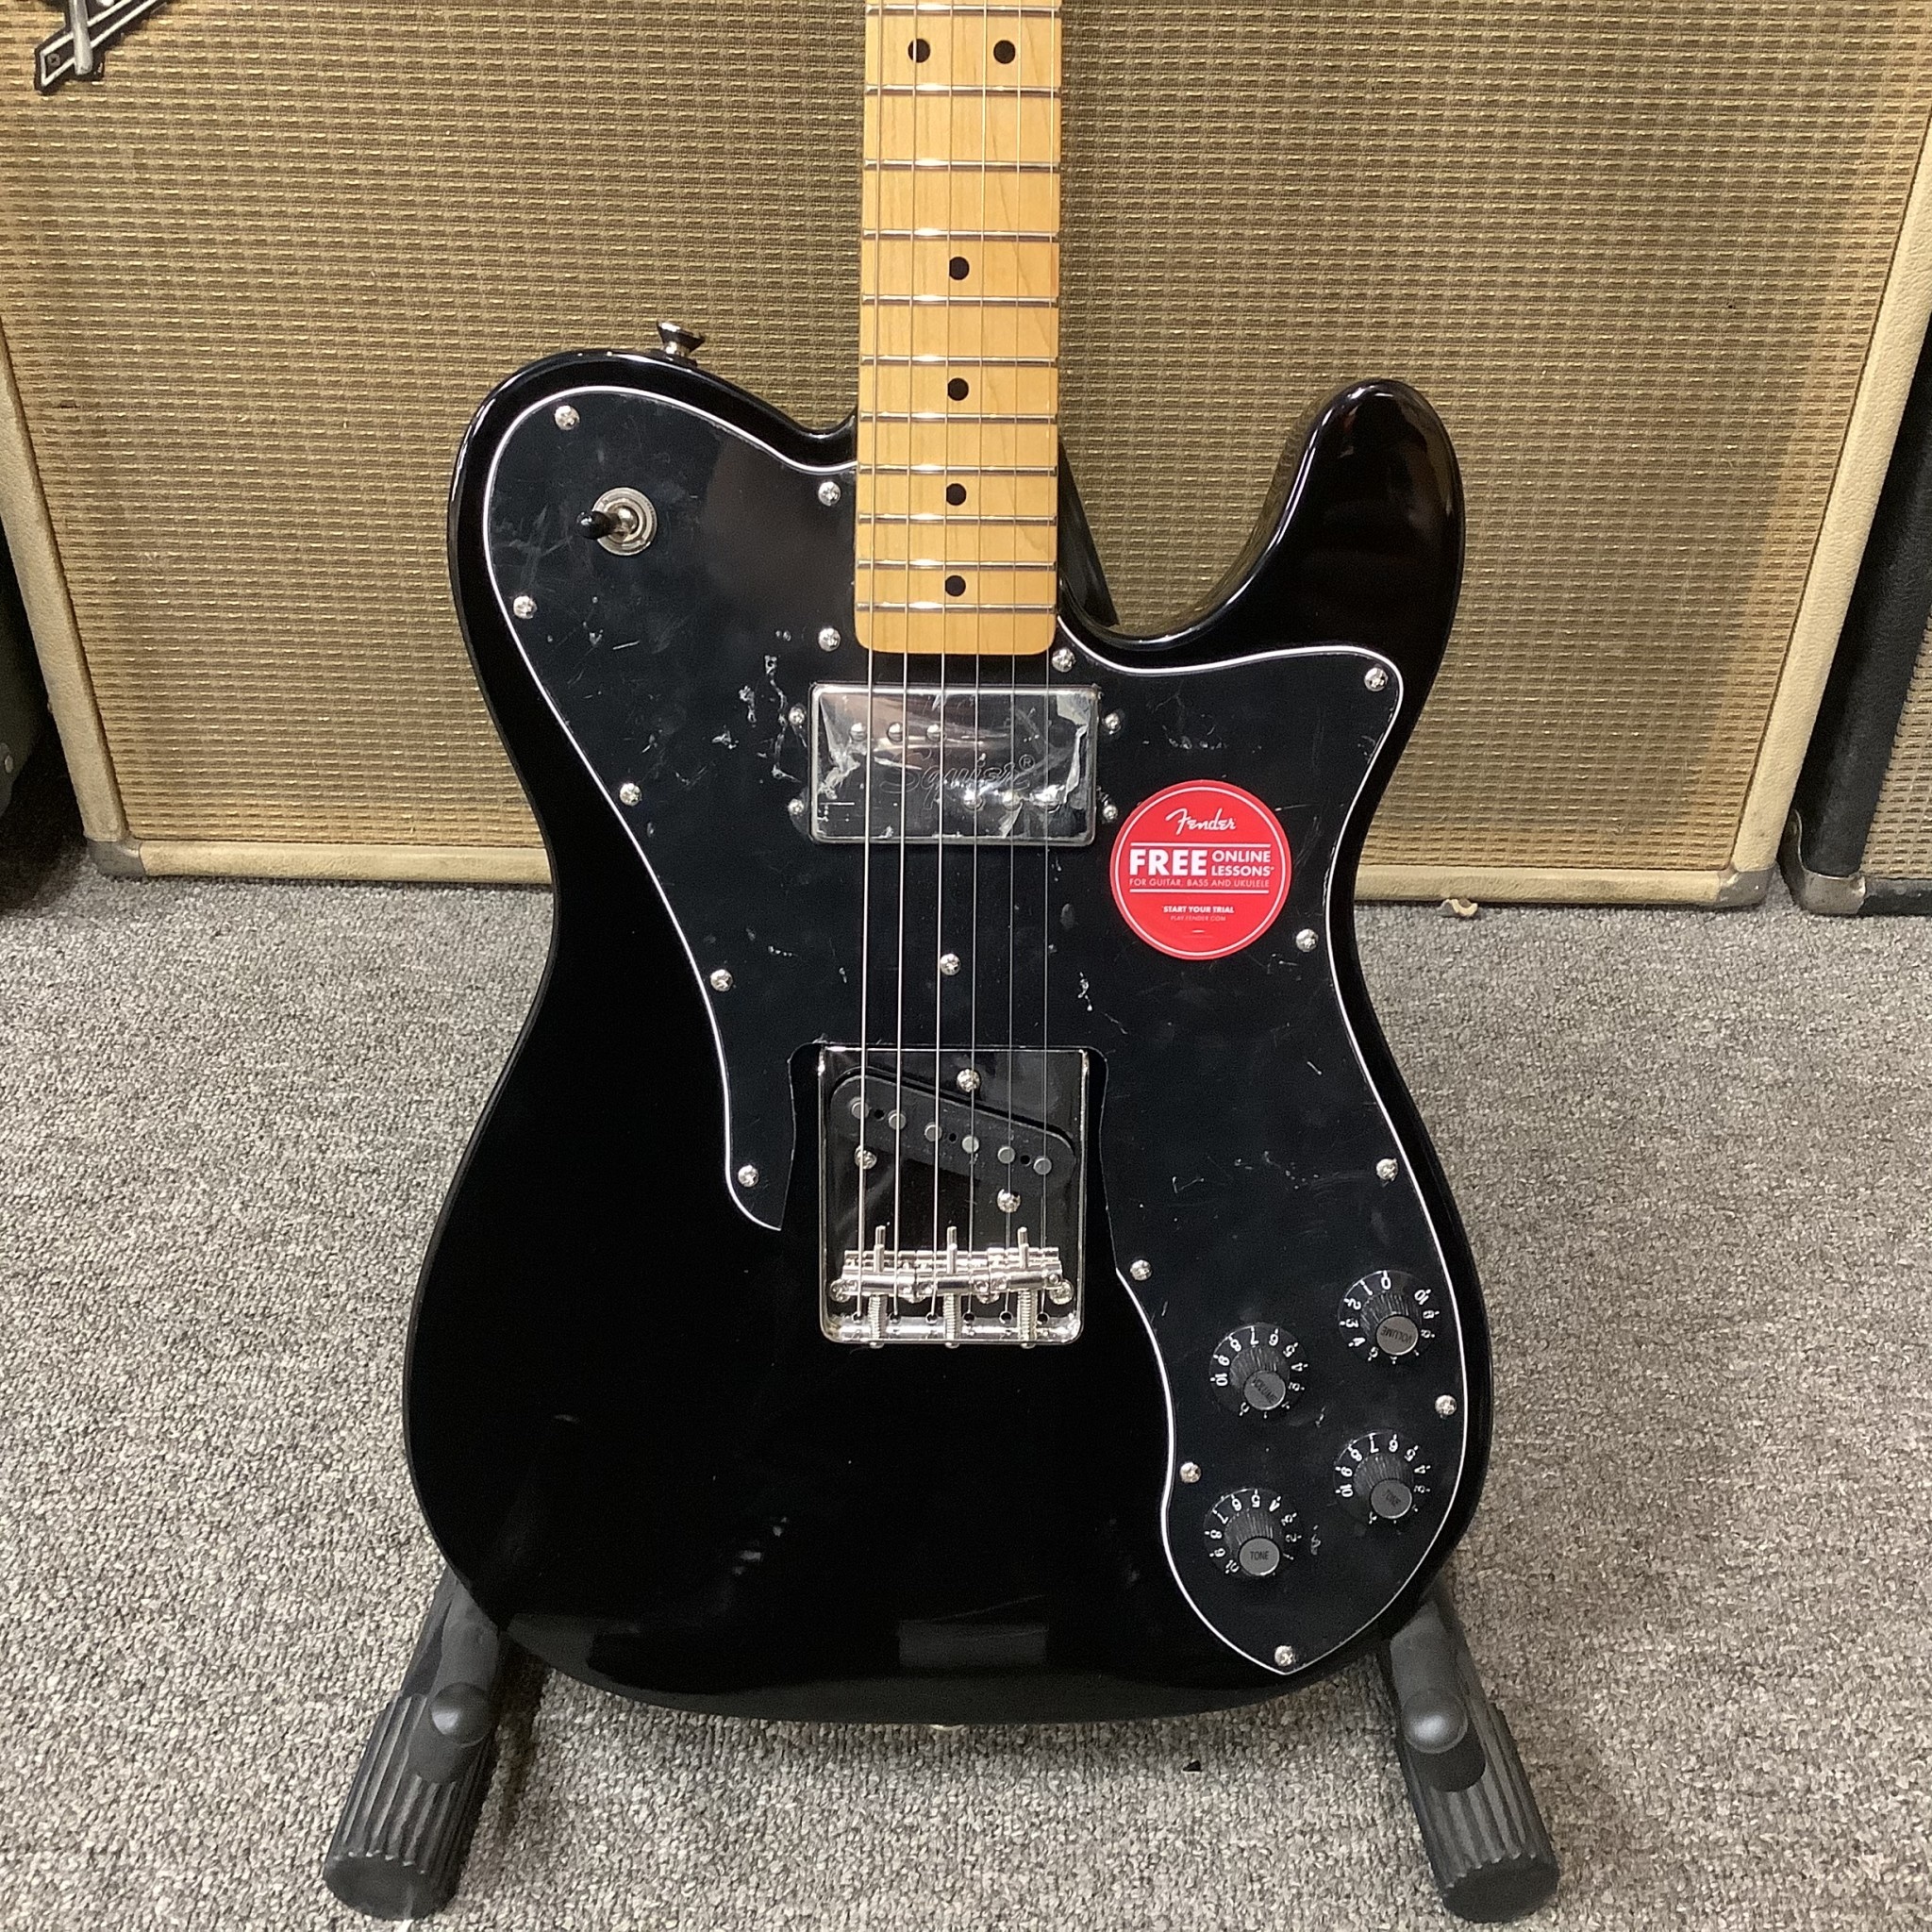 New Fender Squier Made In China Telecaster Custom Black Classic